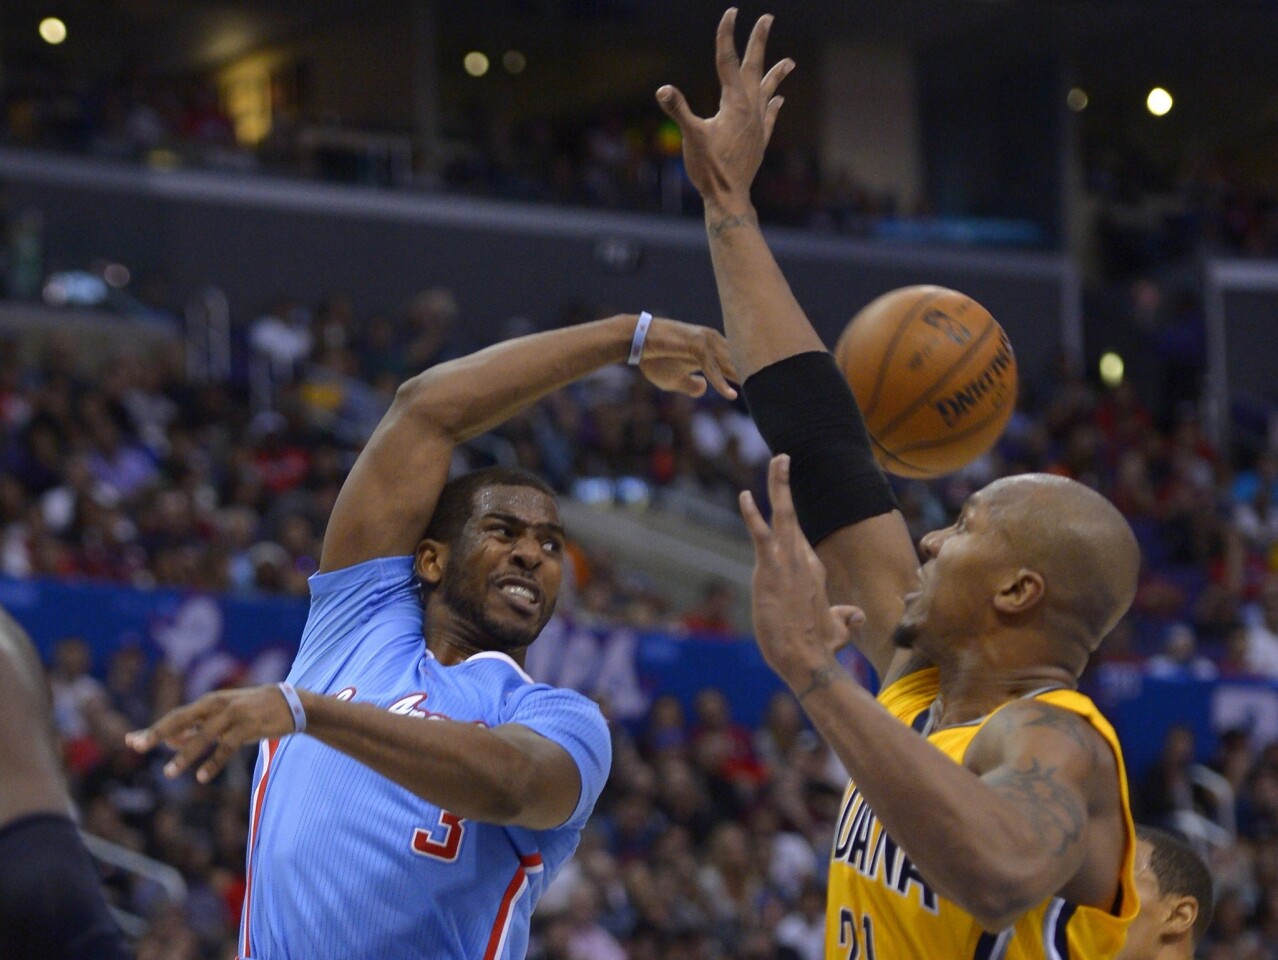 Clippers point guard Chris Paul flips a pass around Pacers power forward David West in the second half Sunday at Staples Center.